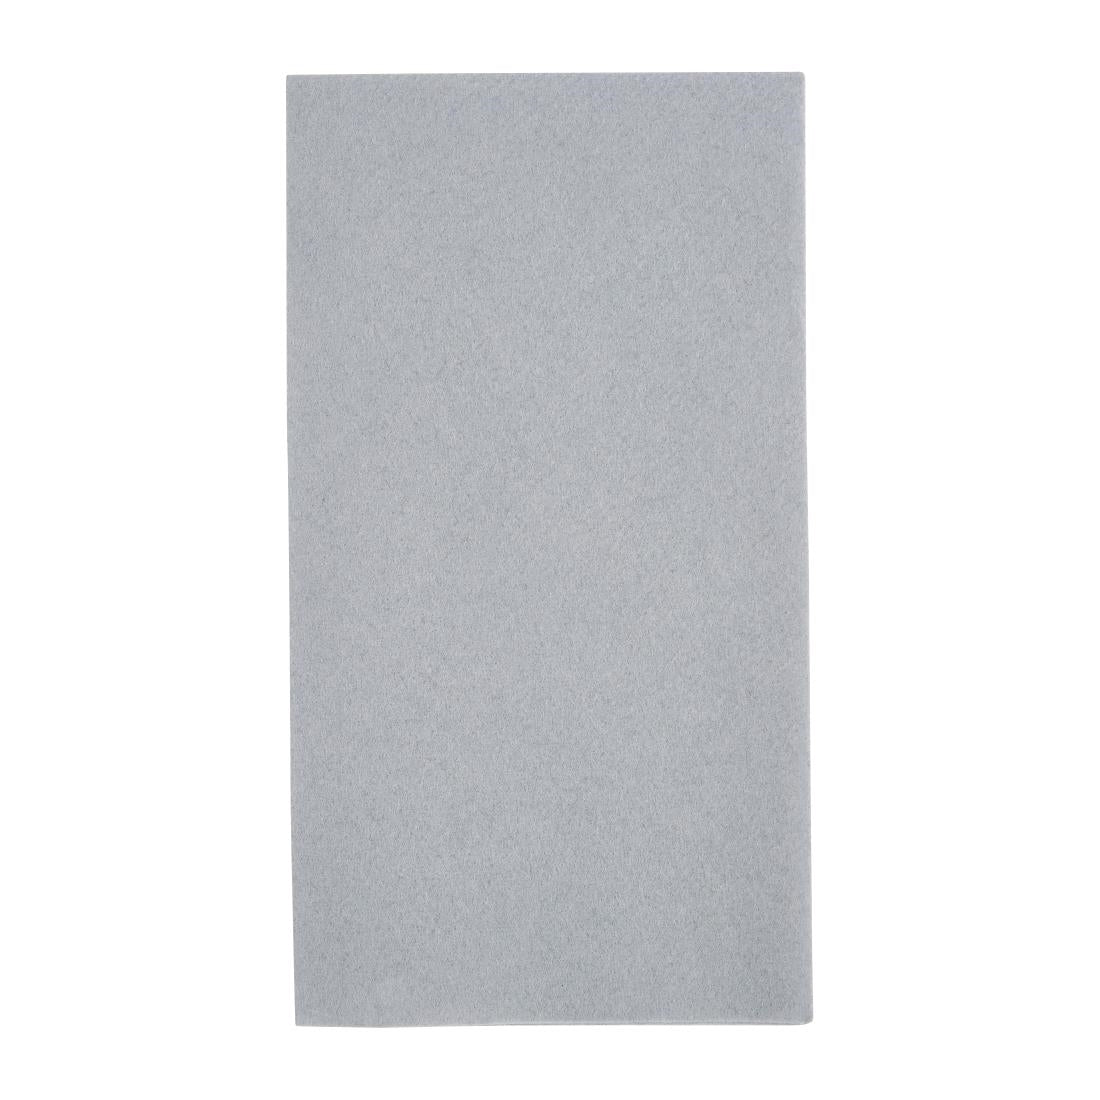 FE274 Fiesta Recyclable Premium Tablin Dinner Napkin Grey 40x40cm Airlaid 1/8 Fold (Pack of 500) JD Catering Equipment Solutions Ltd